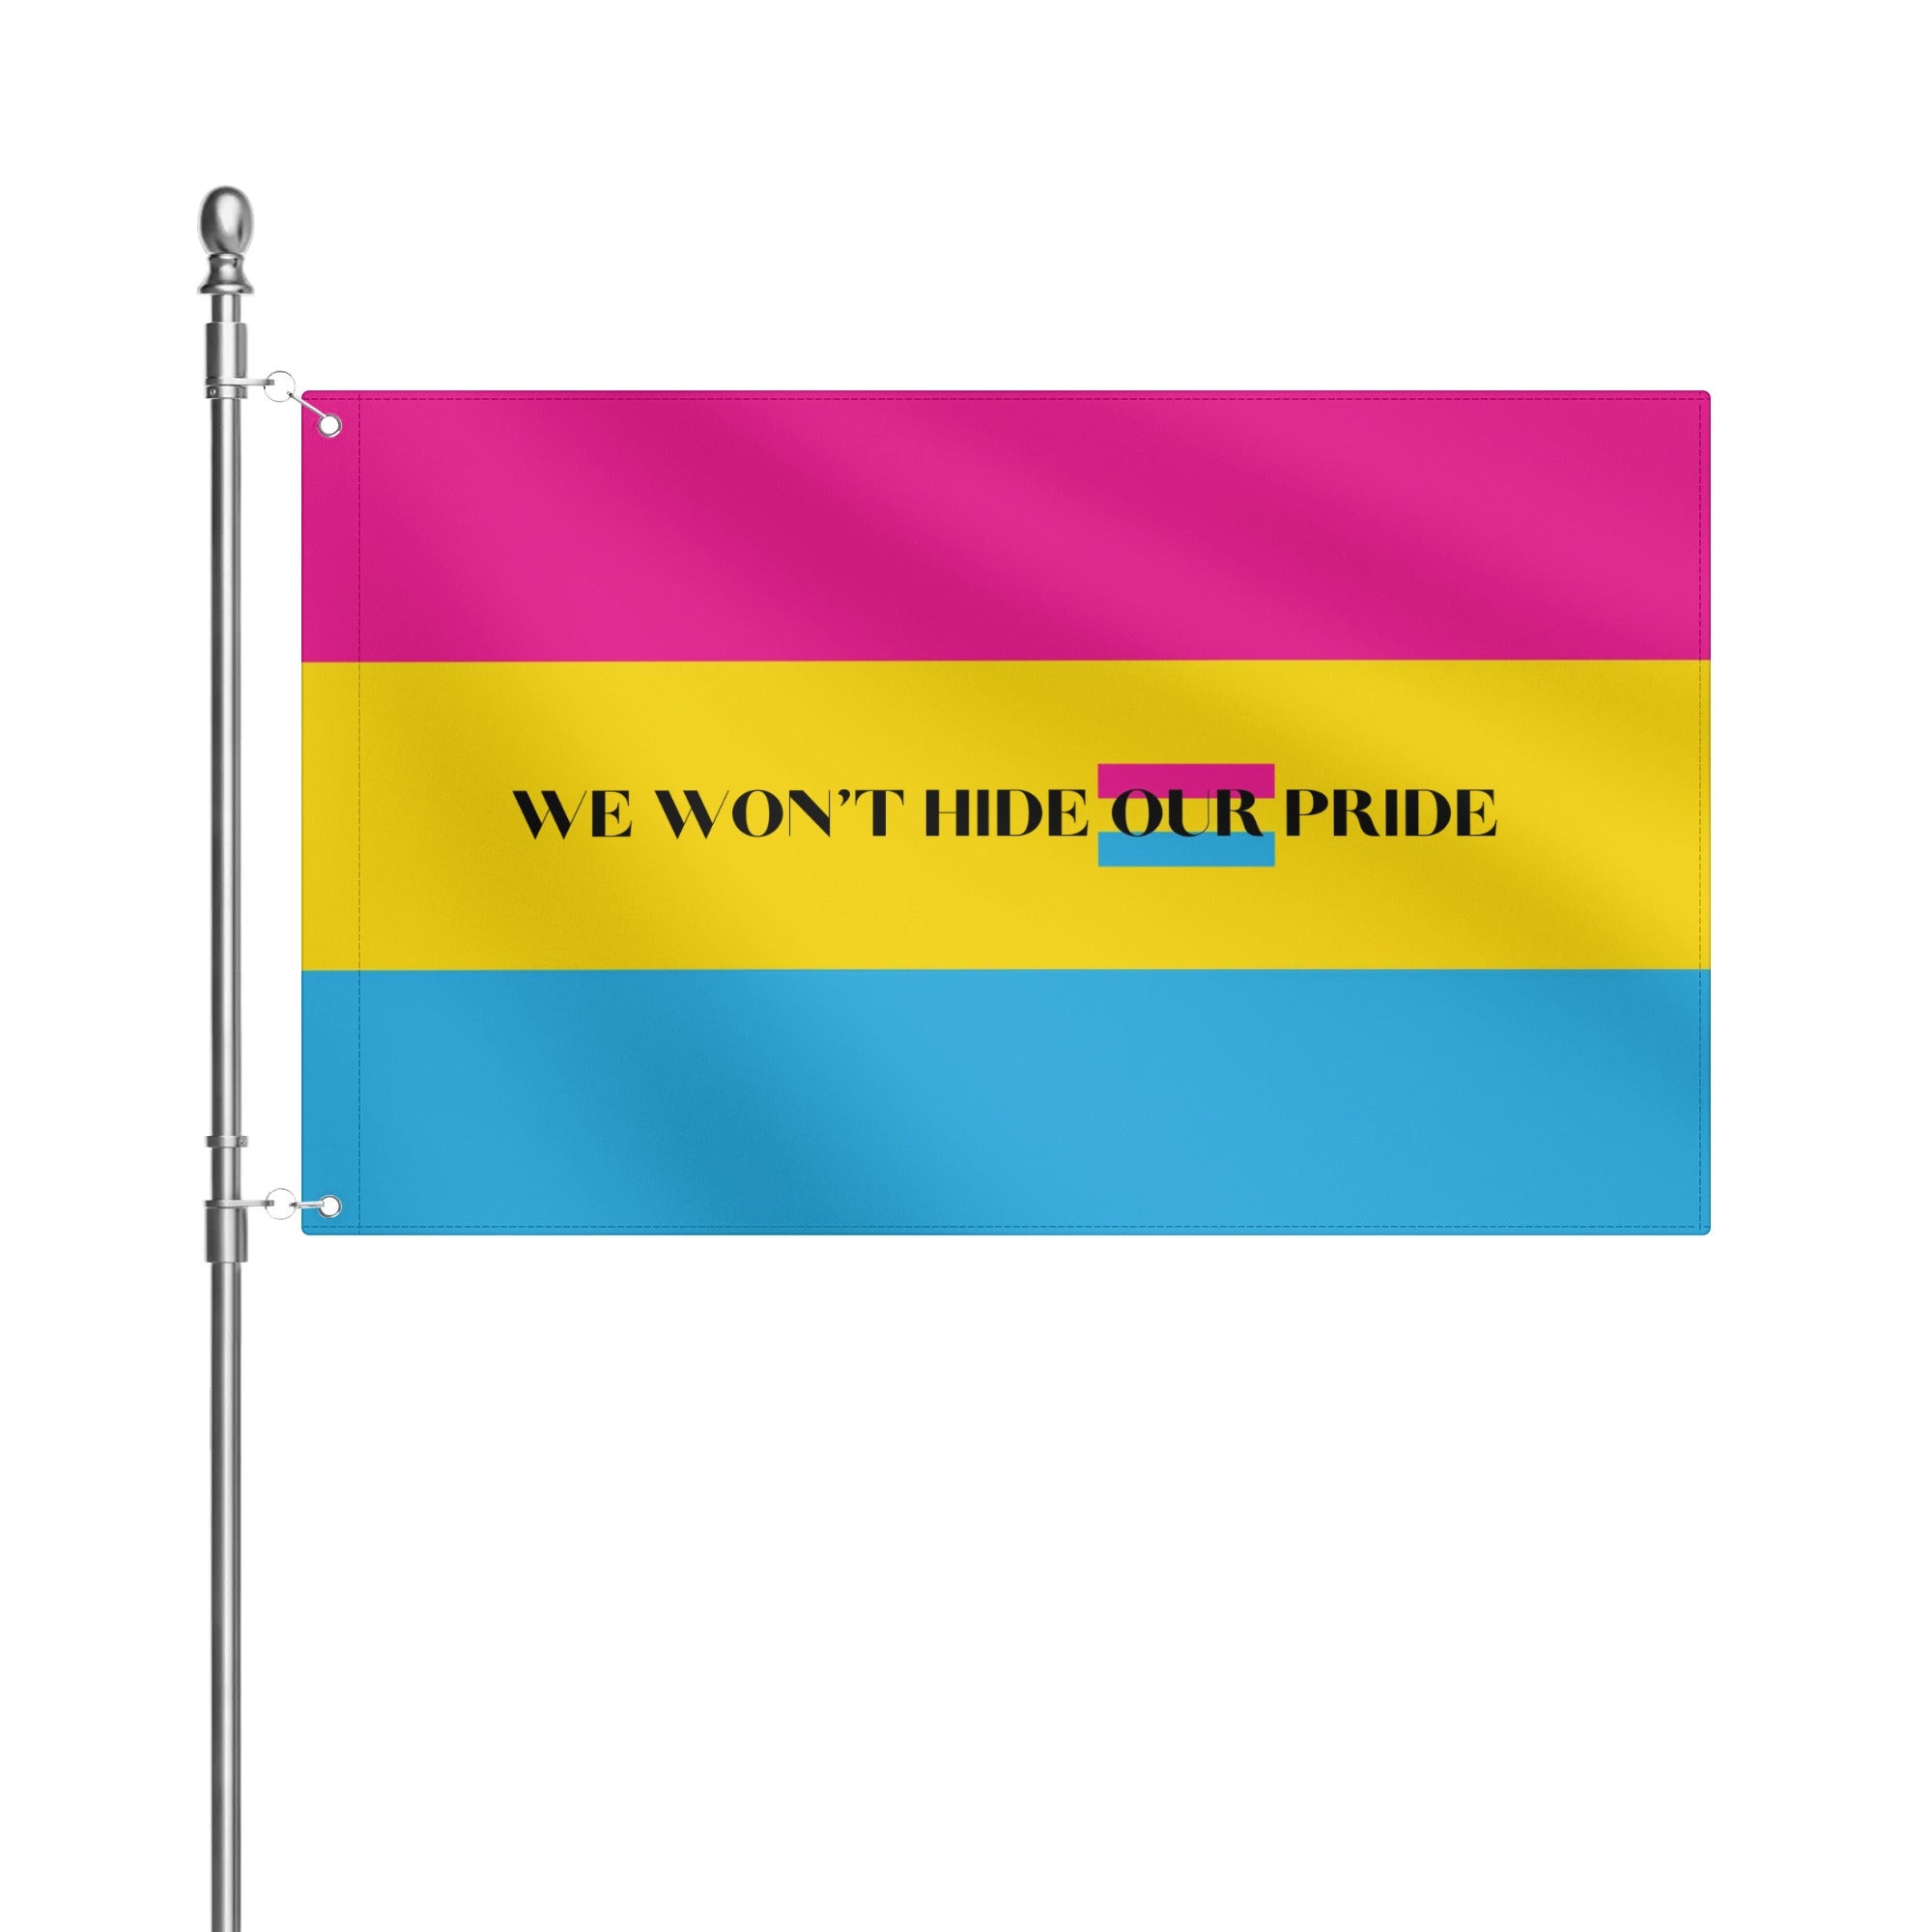 LGBT_Pride-We Wont hide Our Pride Pansexual Flags 3x5 Ft - Rose Gold Co. Shop